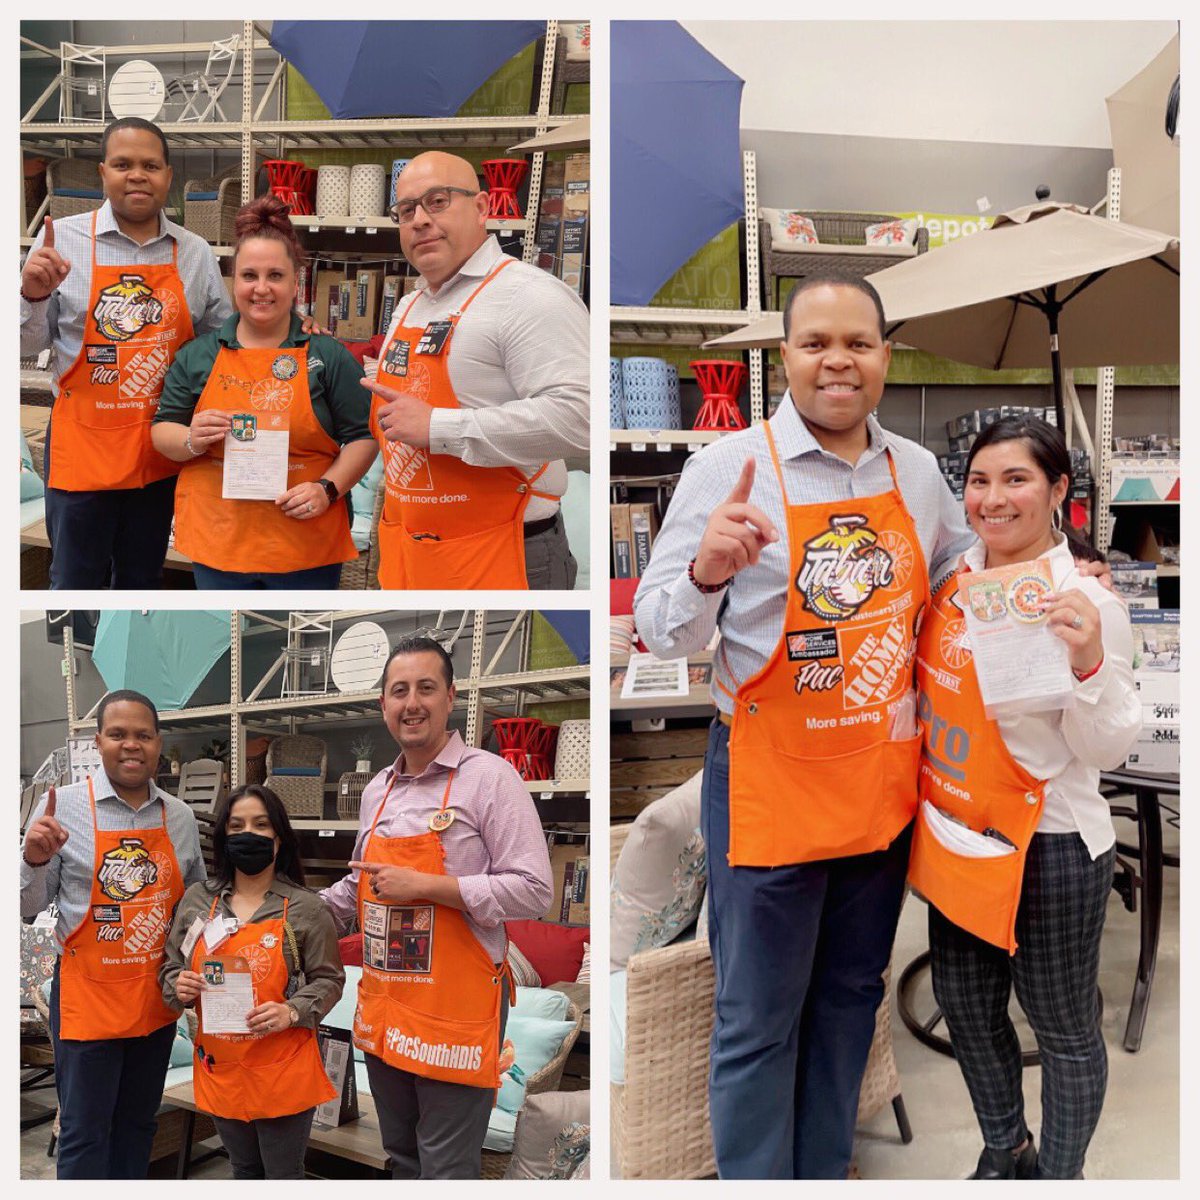 Awesome walk! Thank you for a day of learning and recognition! 🧡 #Team0687